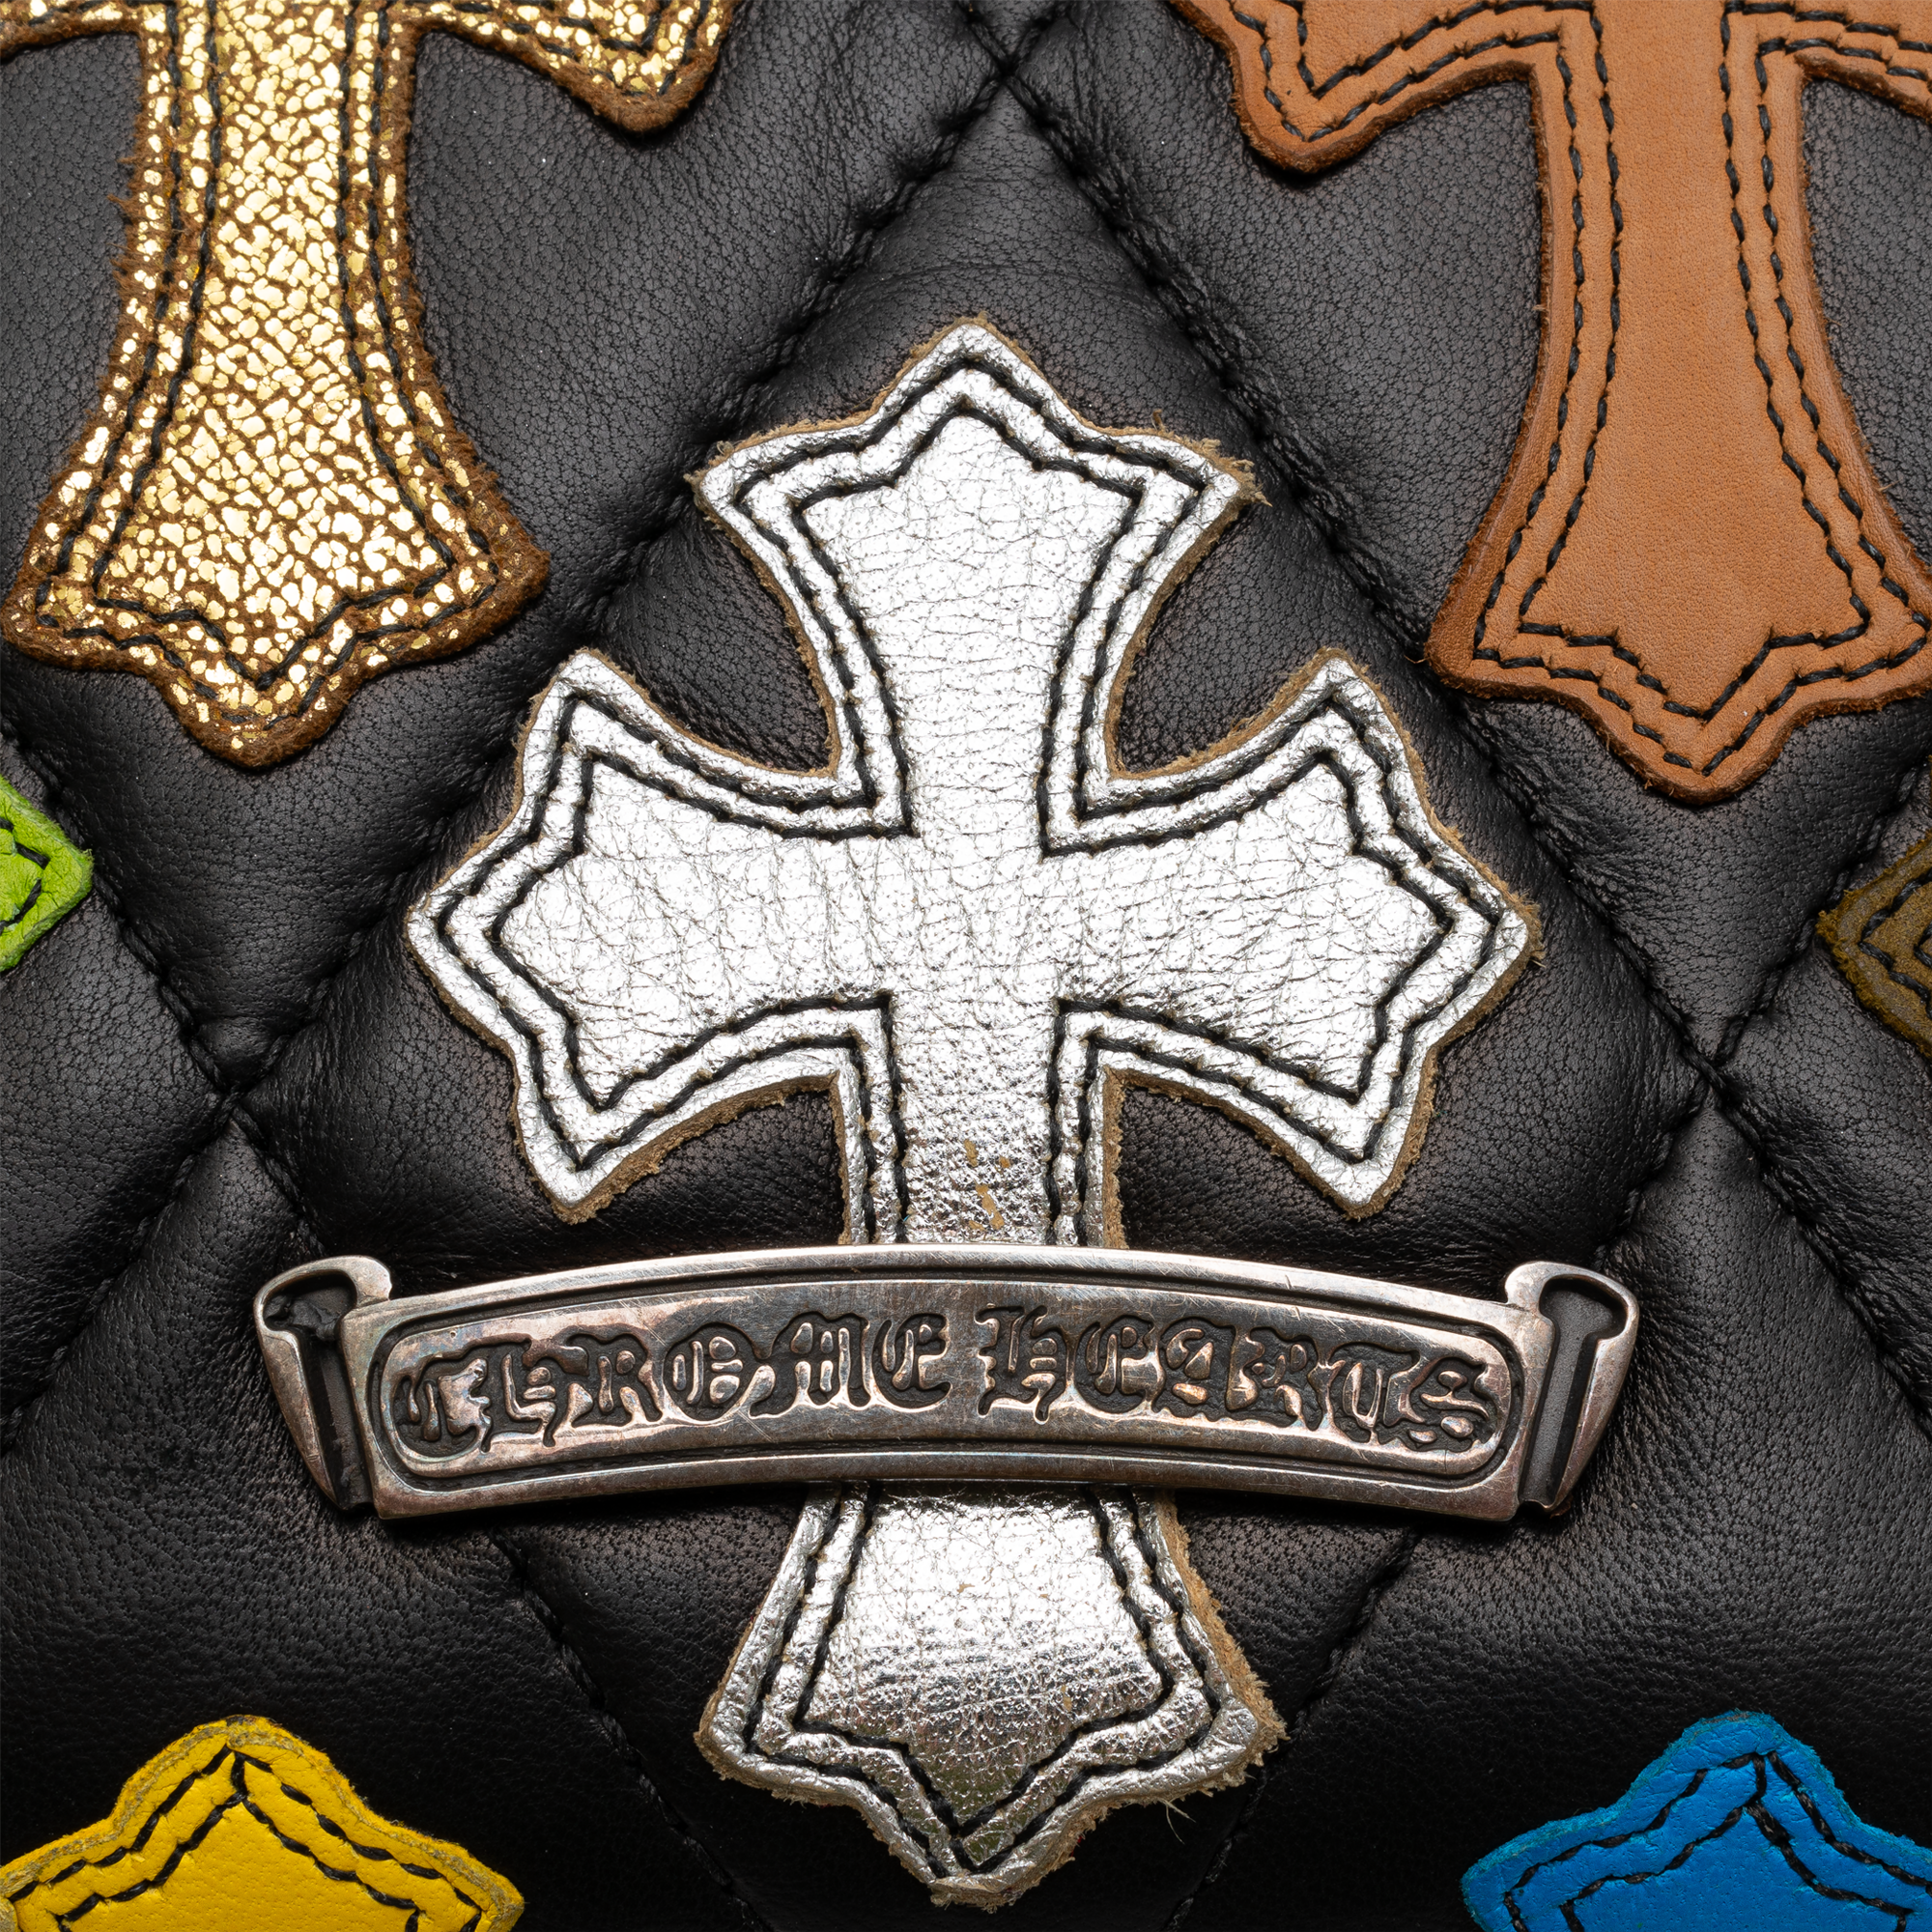 Chrome Hearts Quilted Multi Cross Patch Wallet Black-PLUS